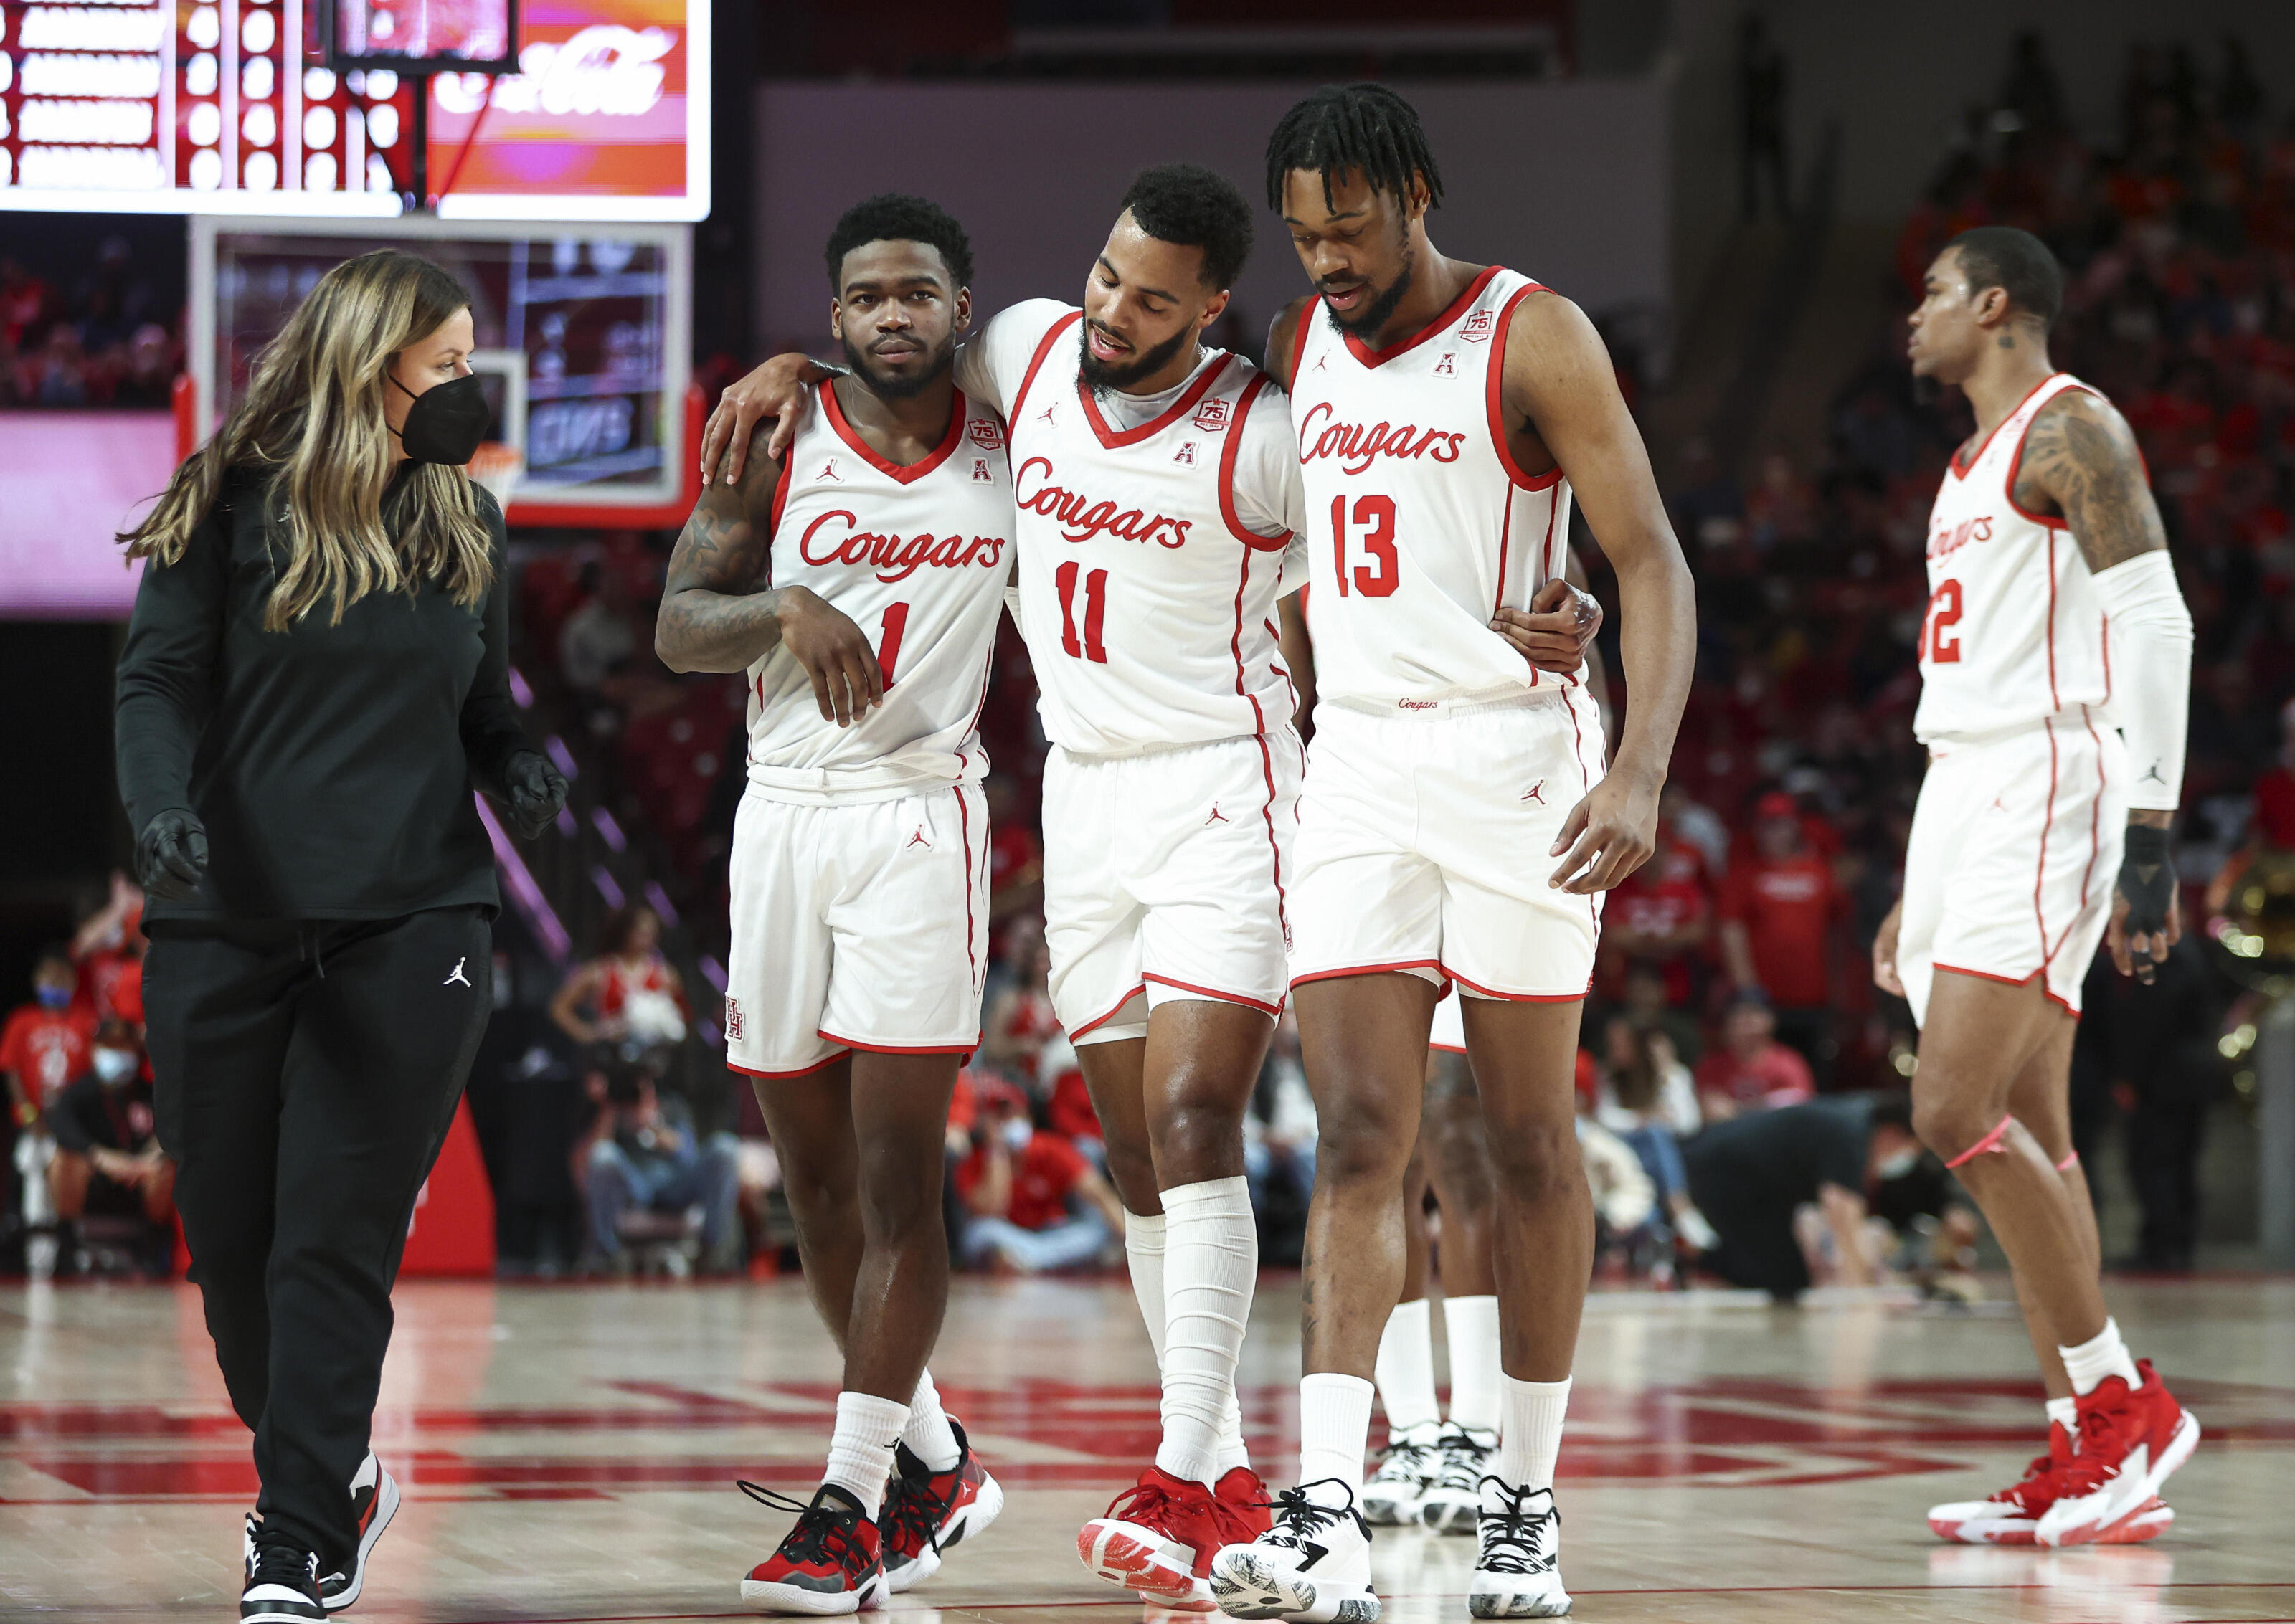 UCF Men's Basketball Gets Hunted Down by #7 Houston Cougars